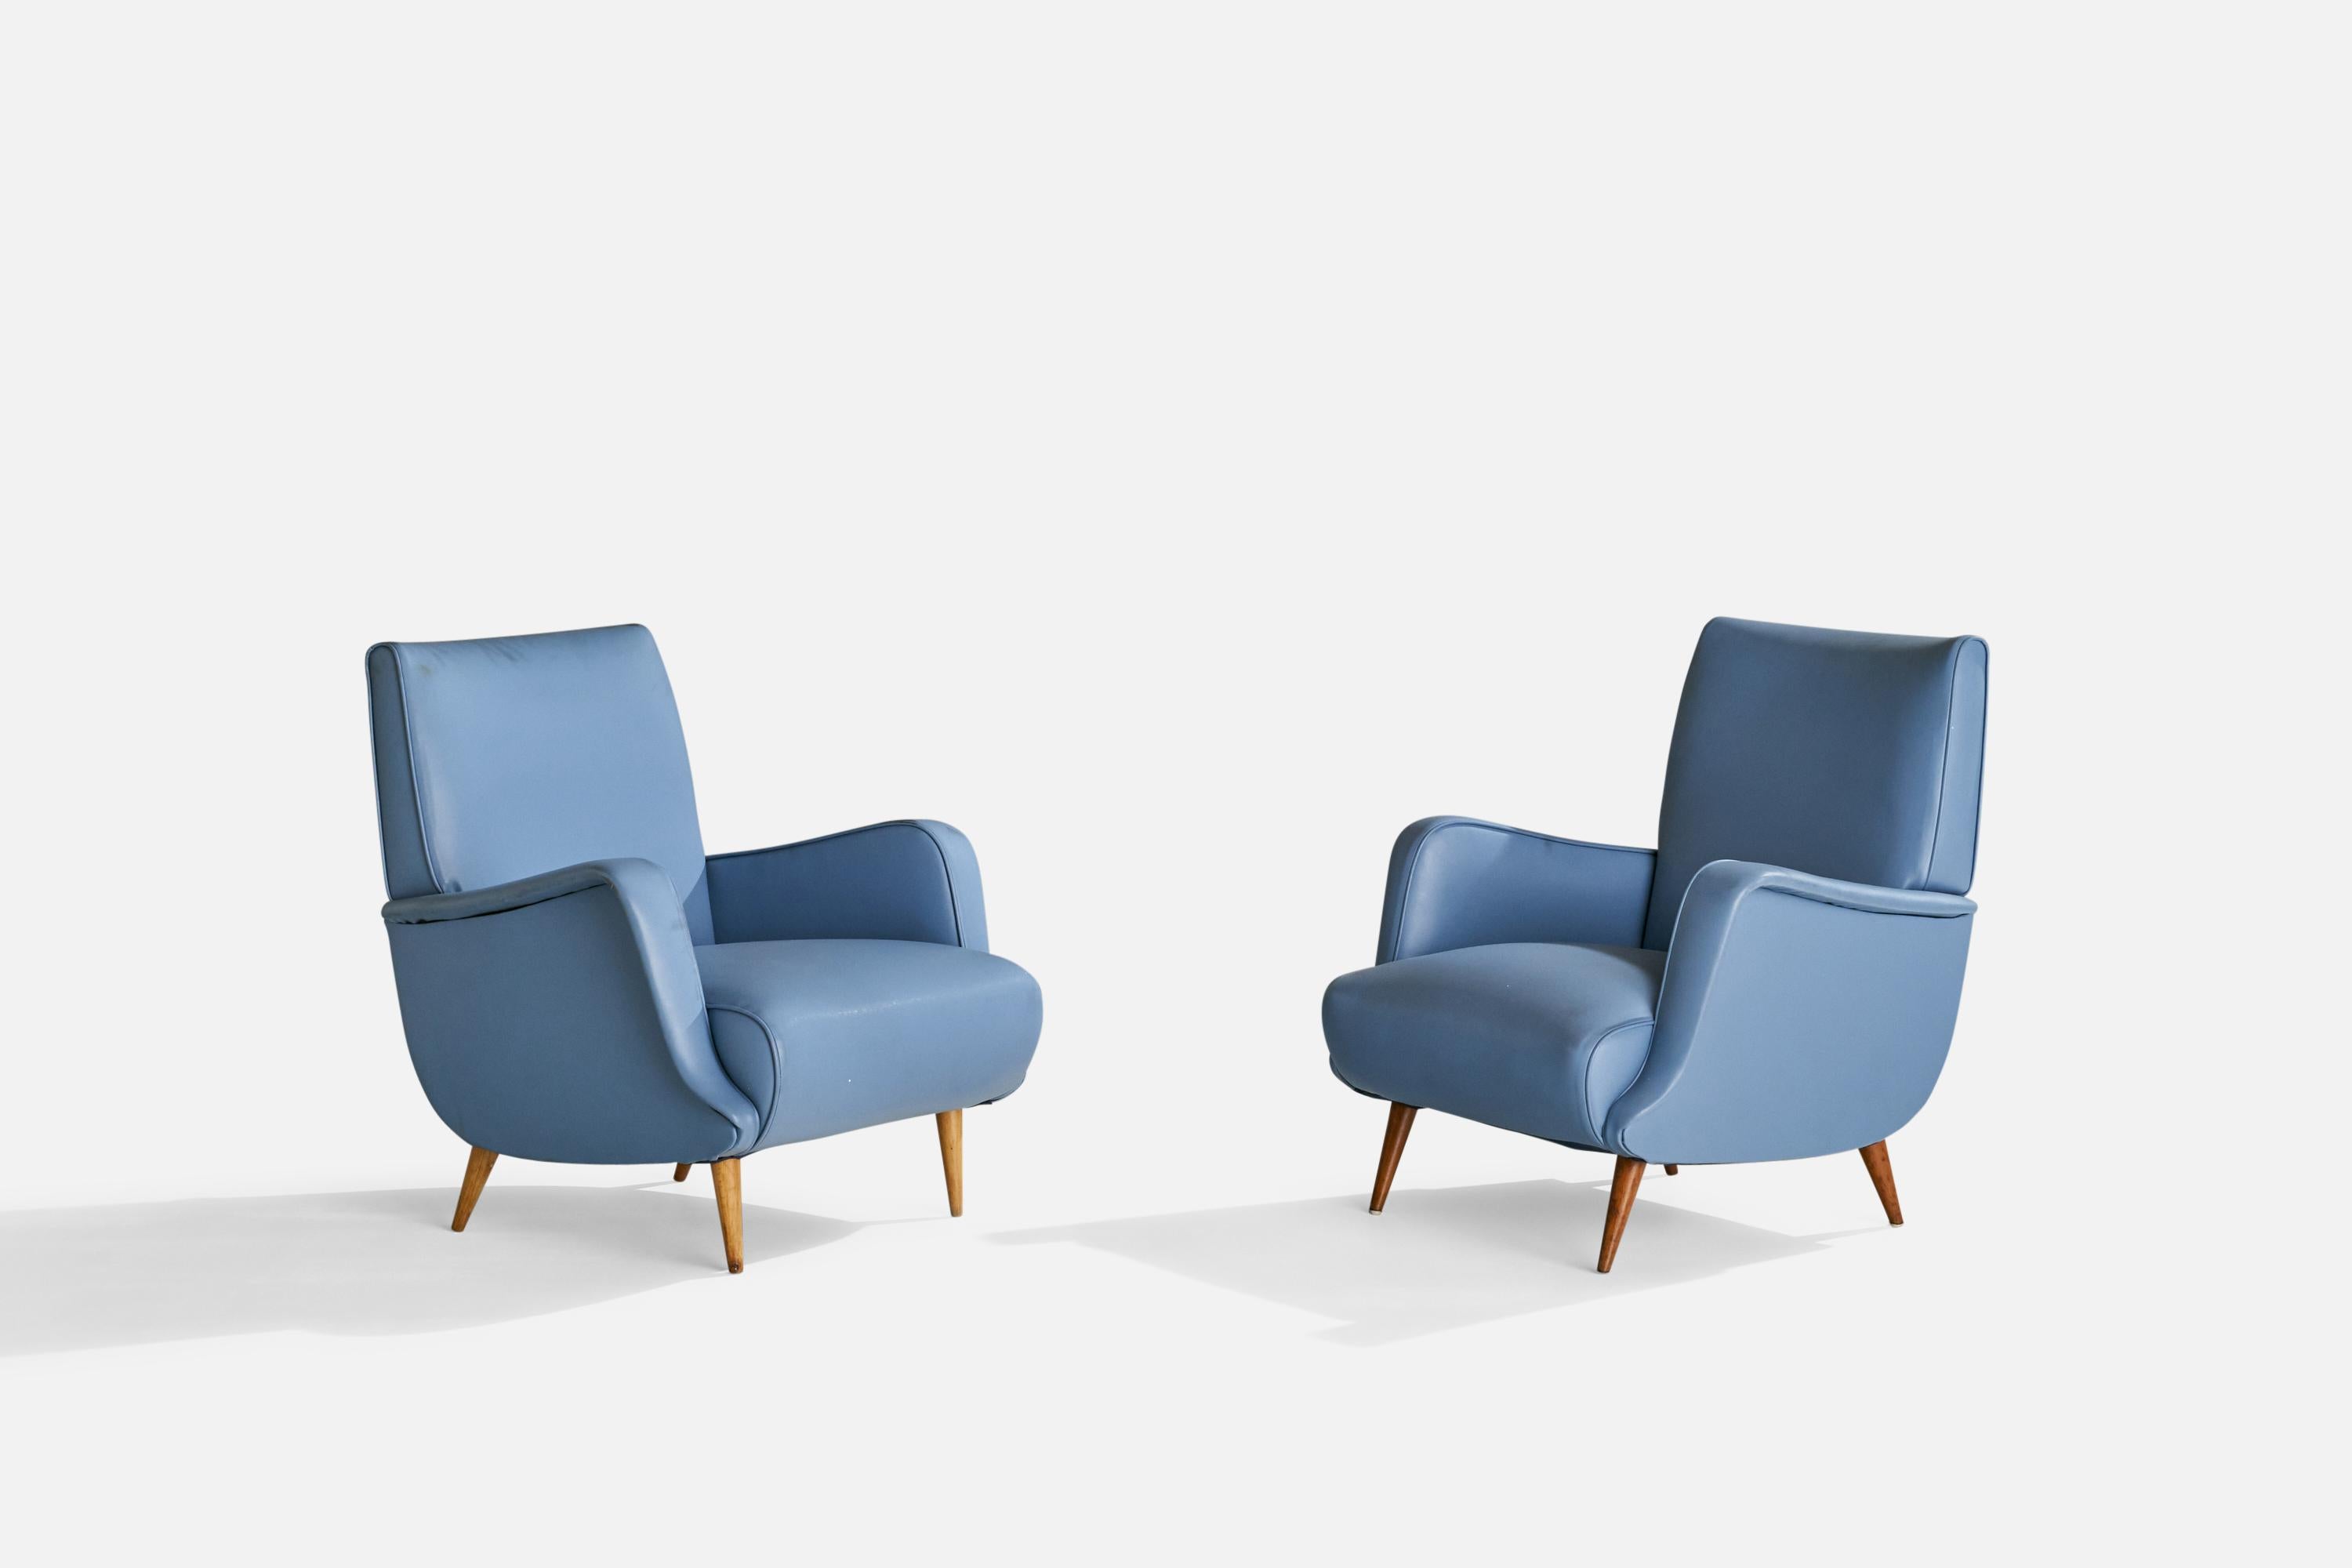 A pair of blue vinyl and wood lounge chairs designed by Carlo De Carli, Italy, c. 1960s.

Seat height 15”.